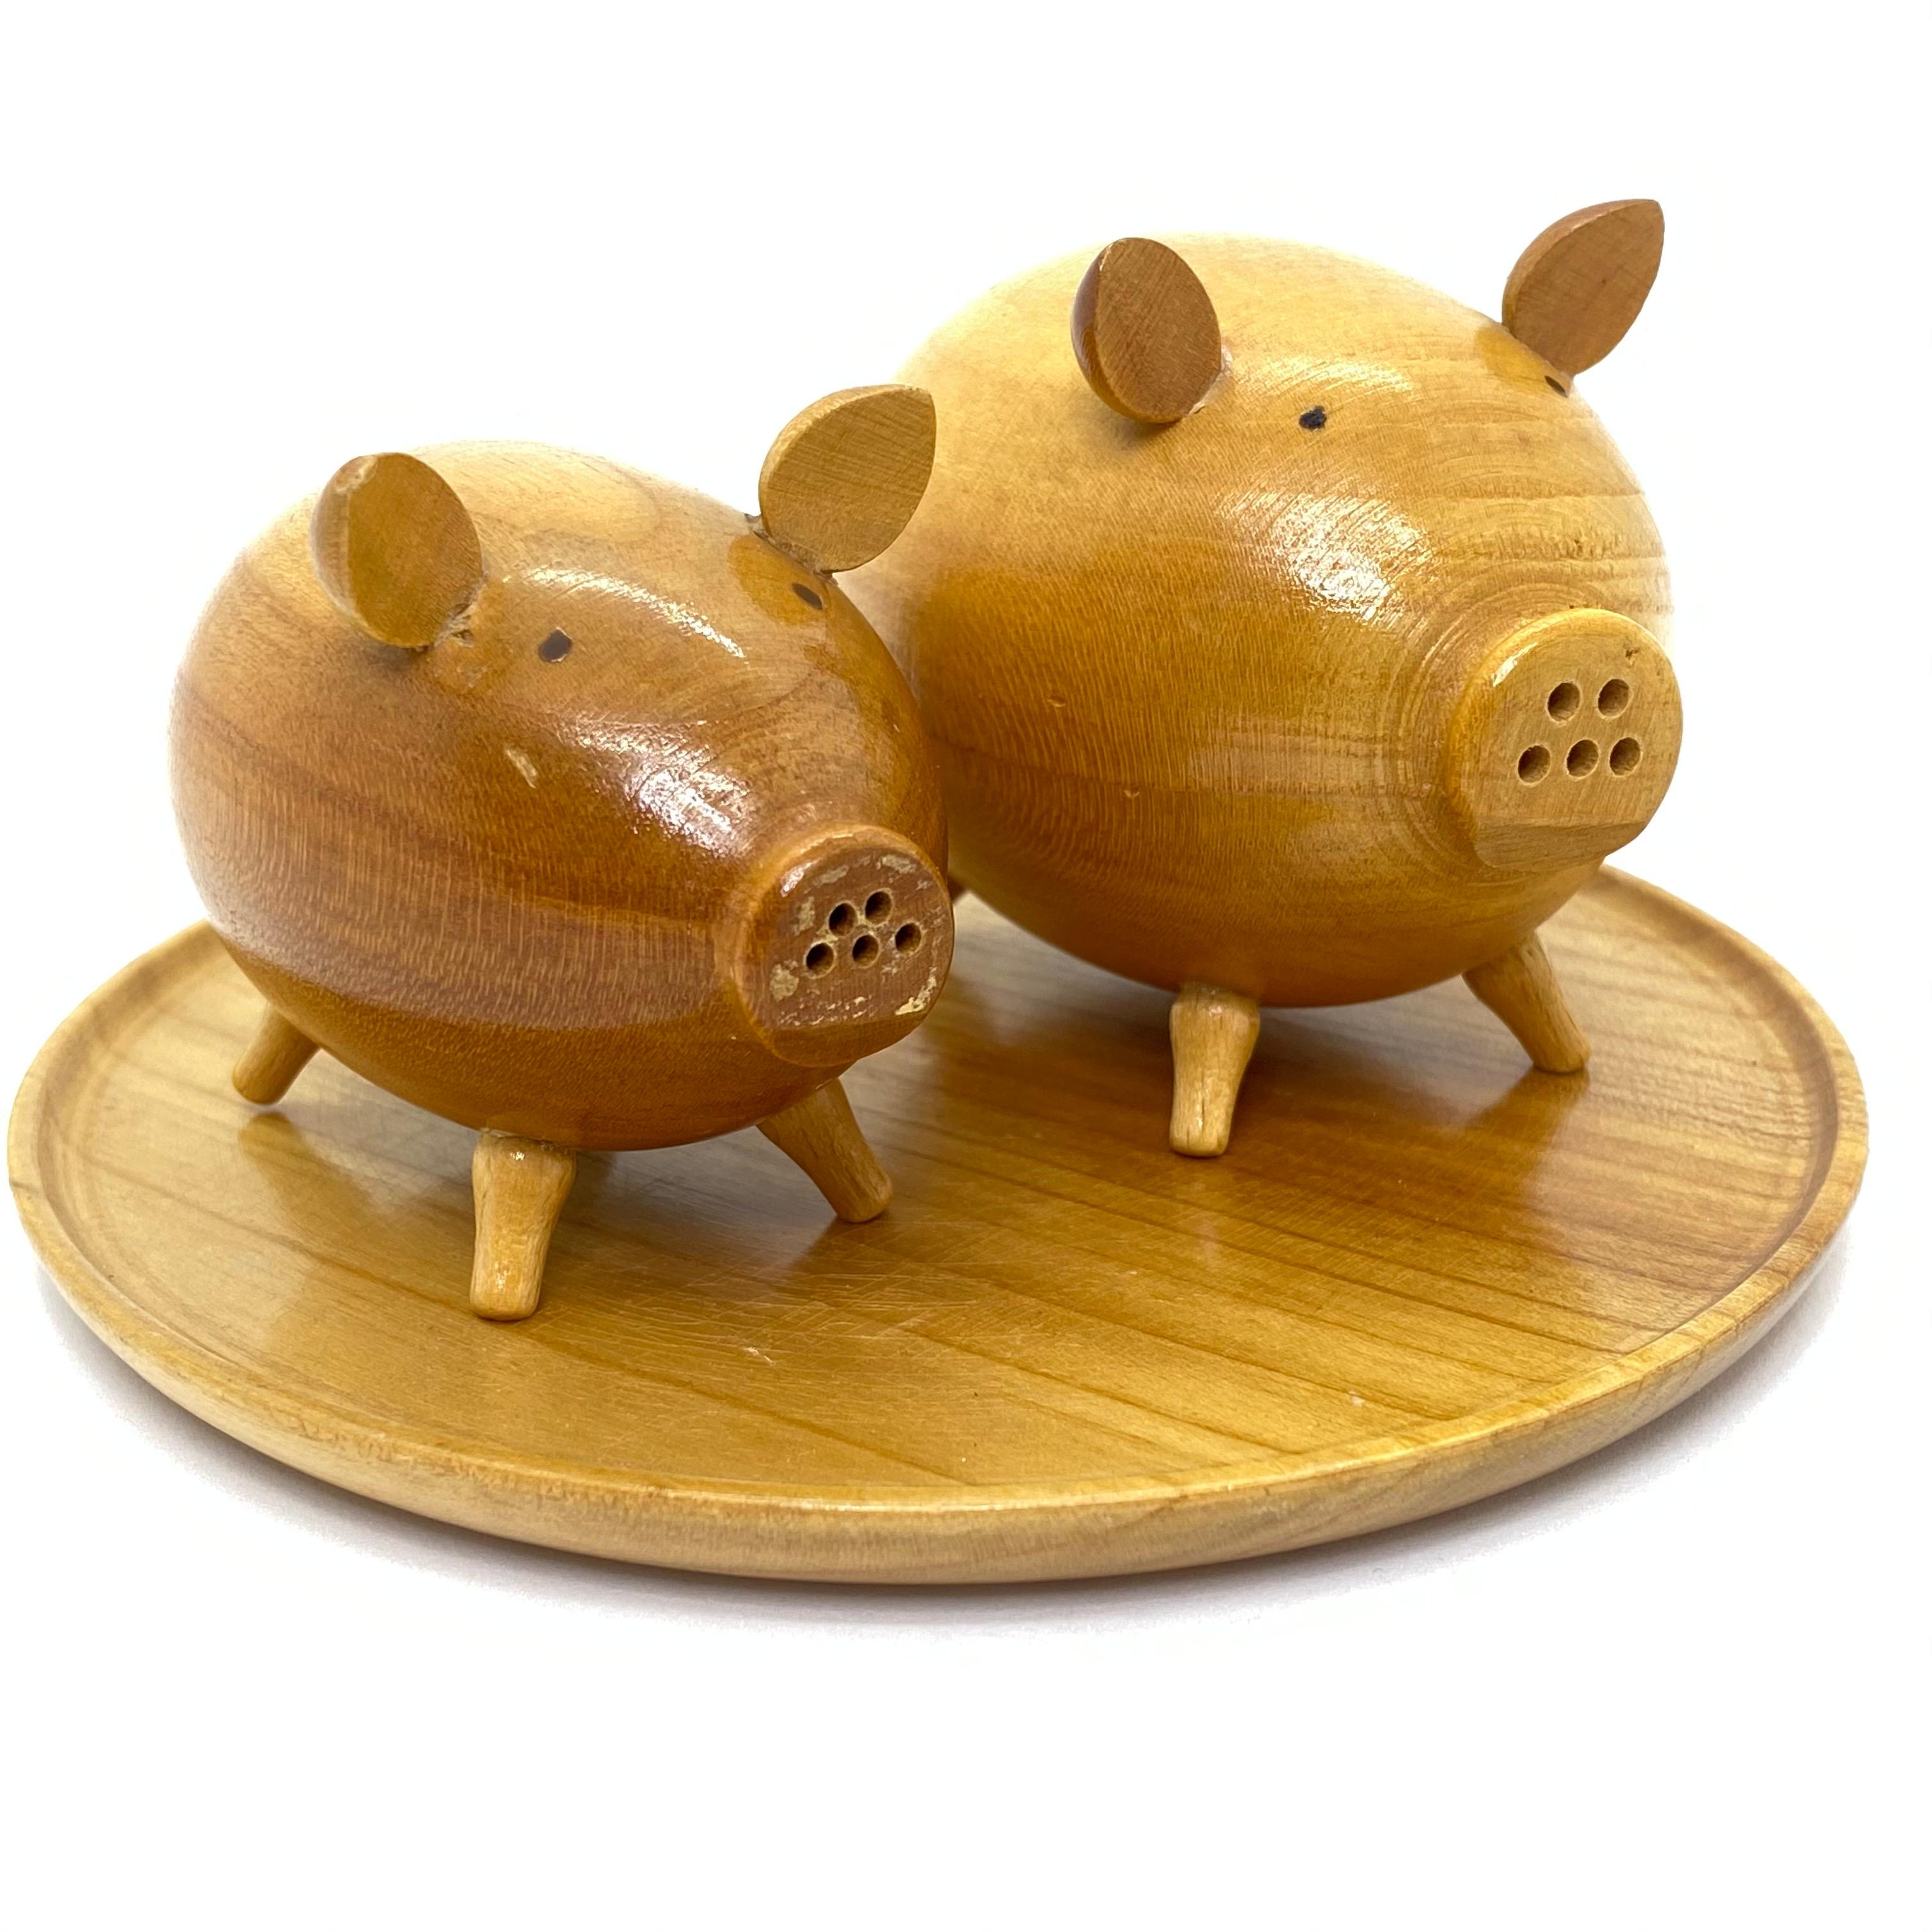 Mid-Century Modern Two Salt and Paper Shaker Pigs on Tray, Wood Danish Design, 1960s For Sale